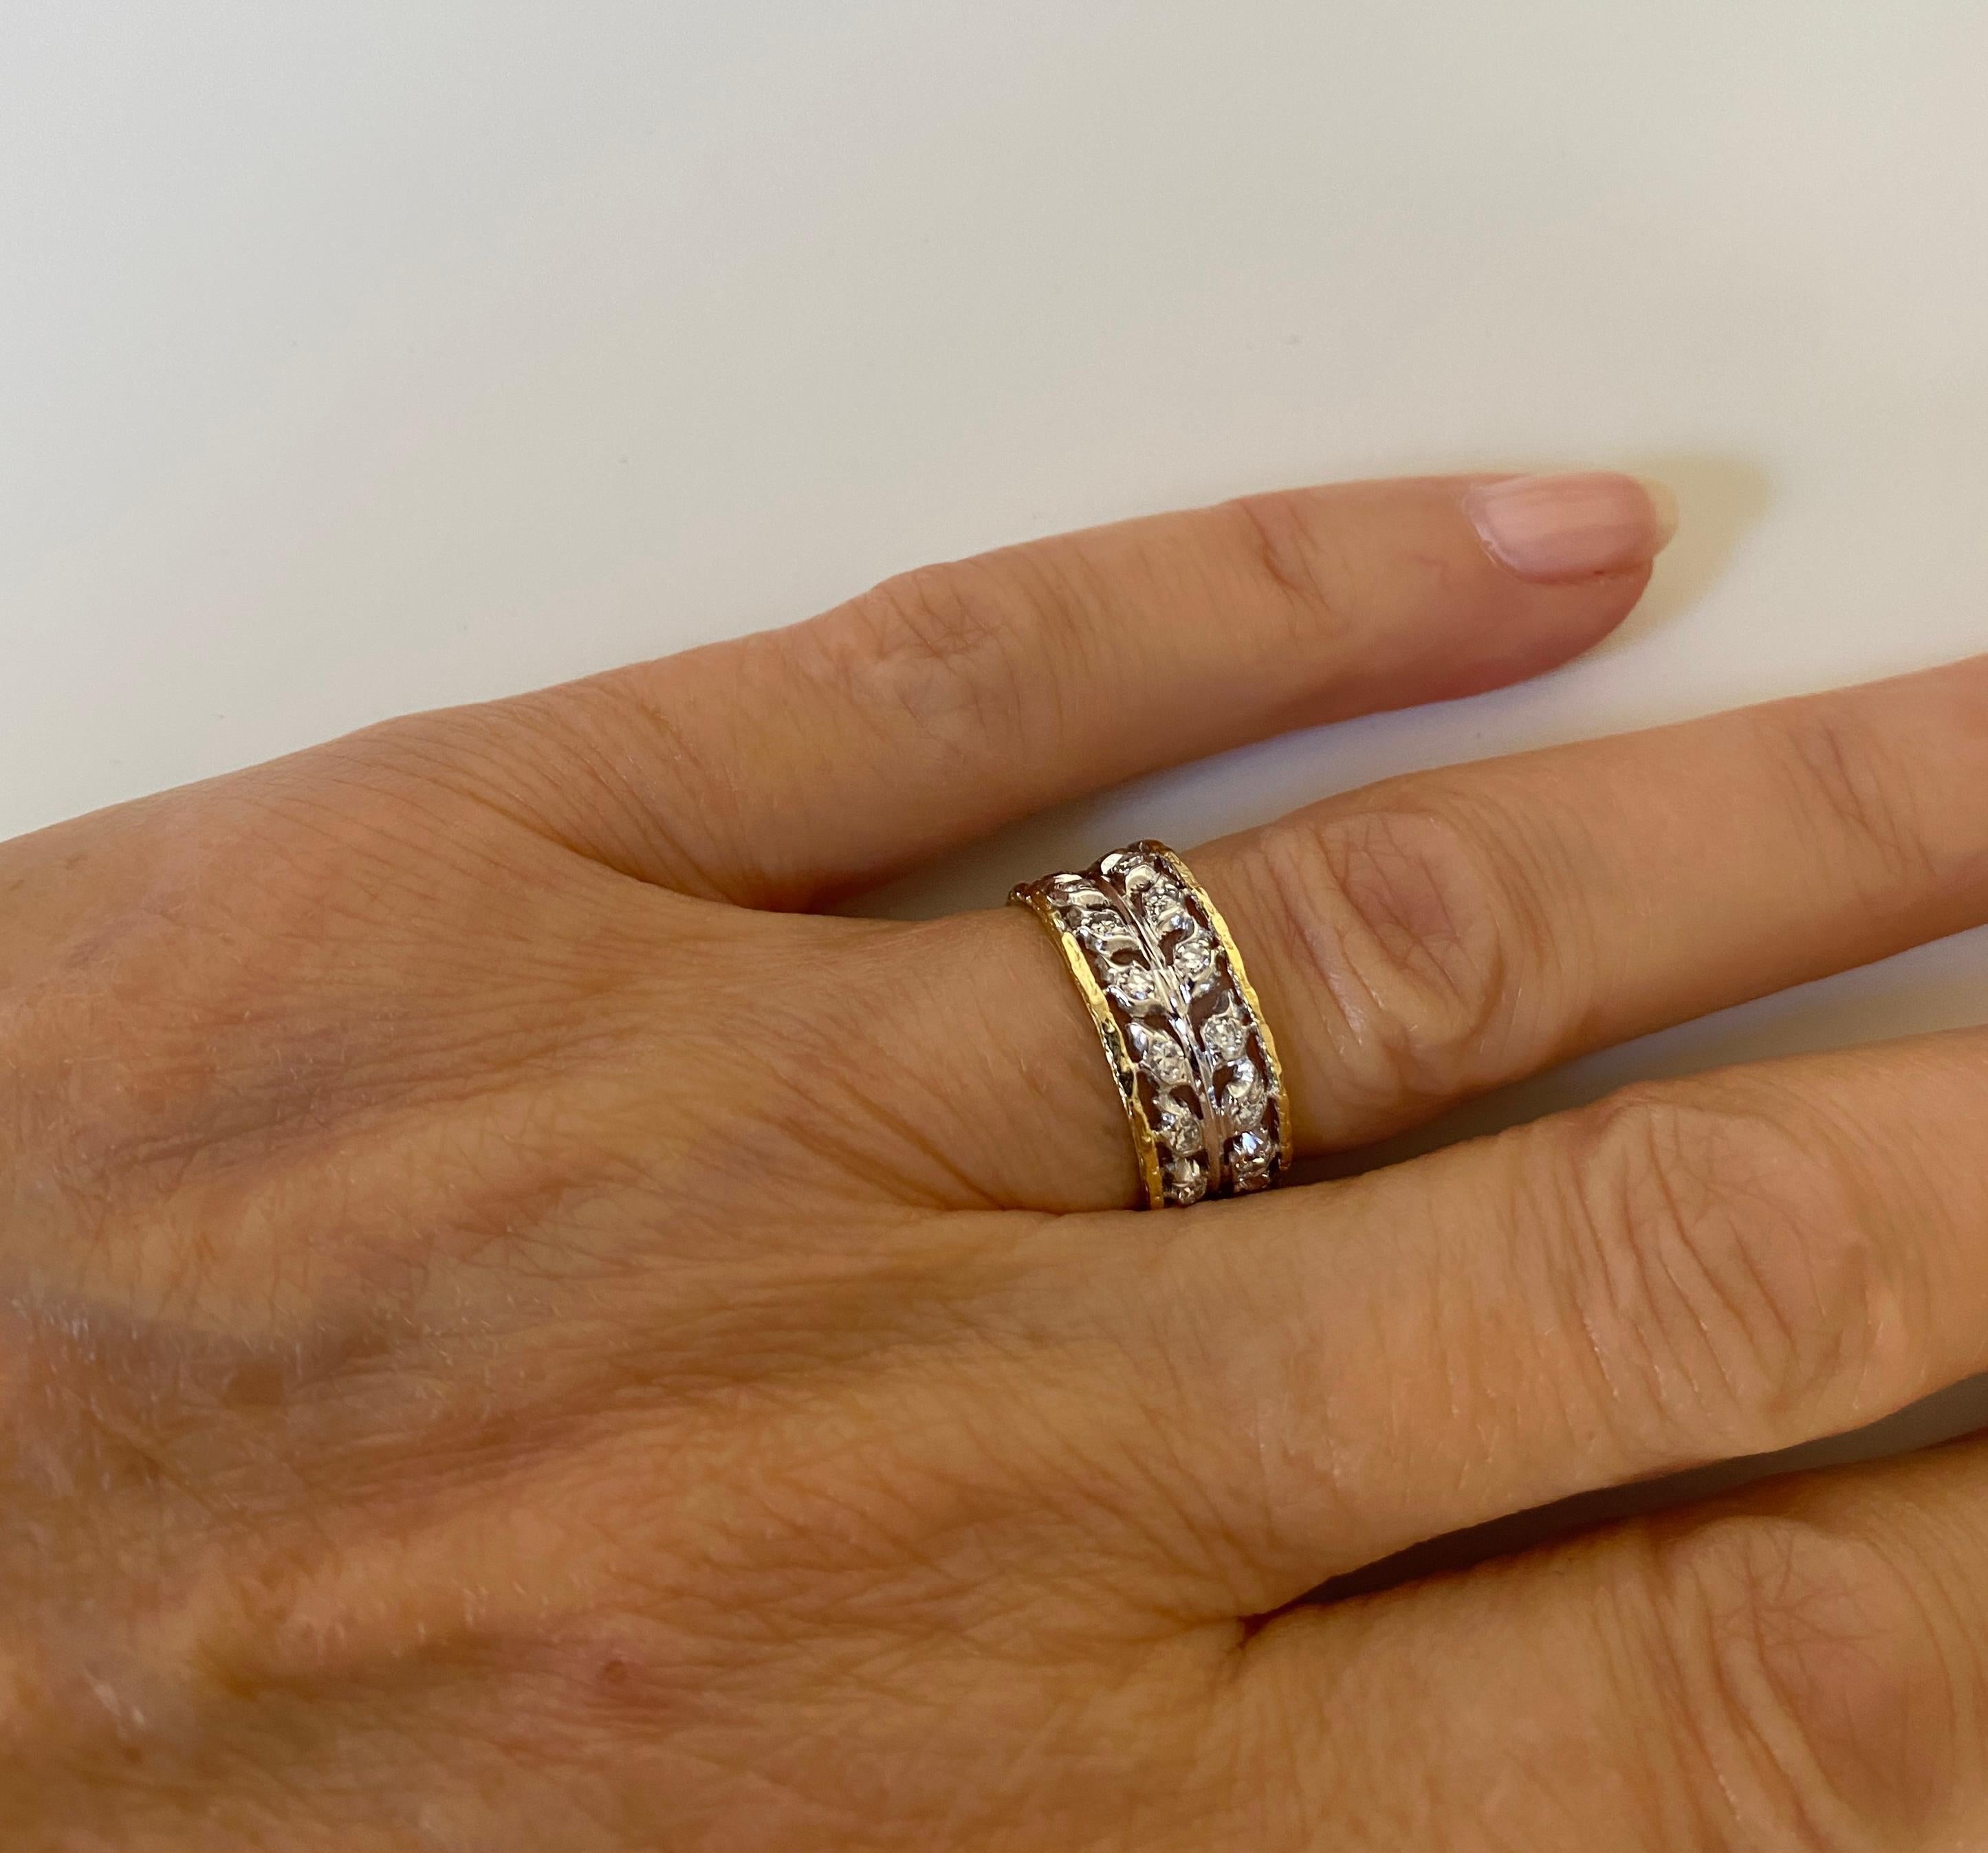 Introducing an exquisite piece from the coveted Buccellati brand, the Italian Mario Buccellati Signature circa 2010 Diamonds 18 karat Gold Band Ramage Eternelle collection .
The famous hallmark 